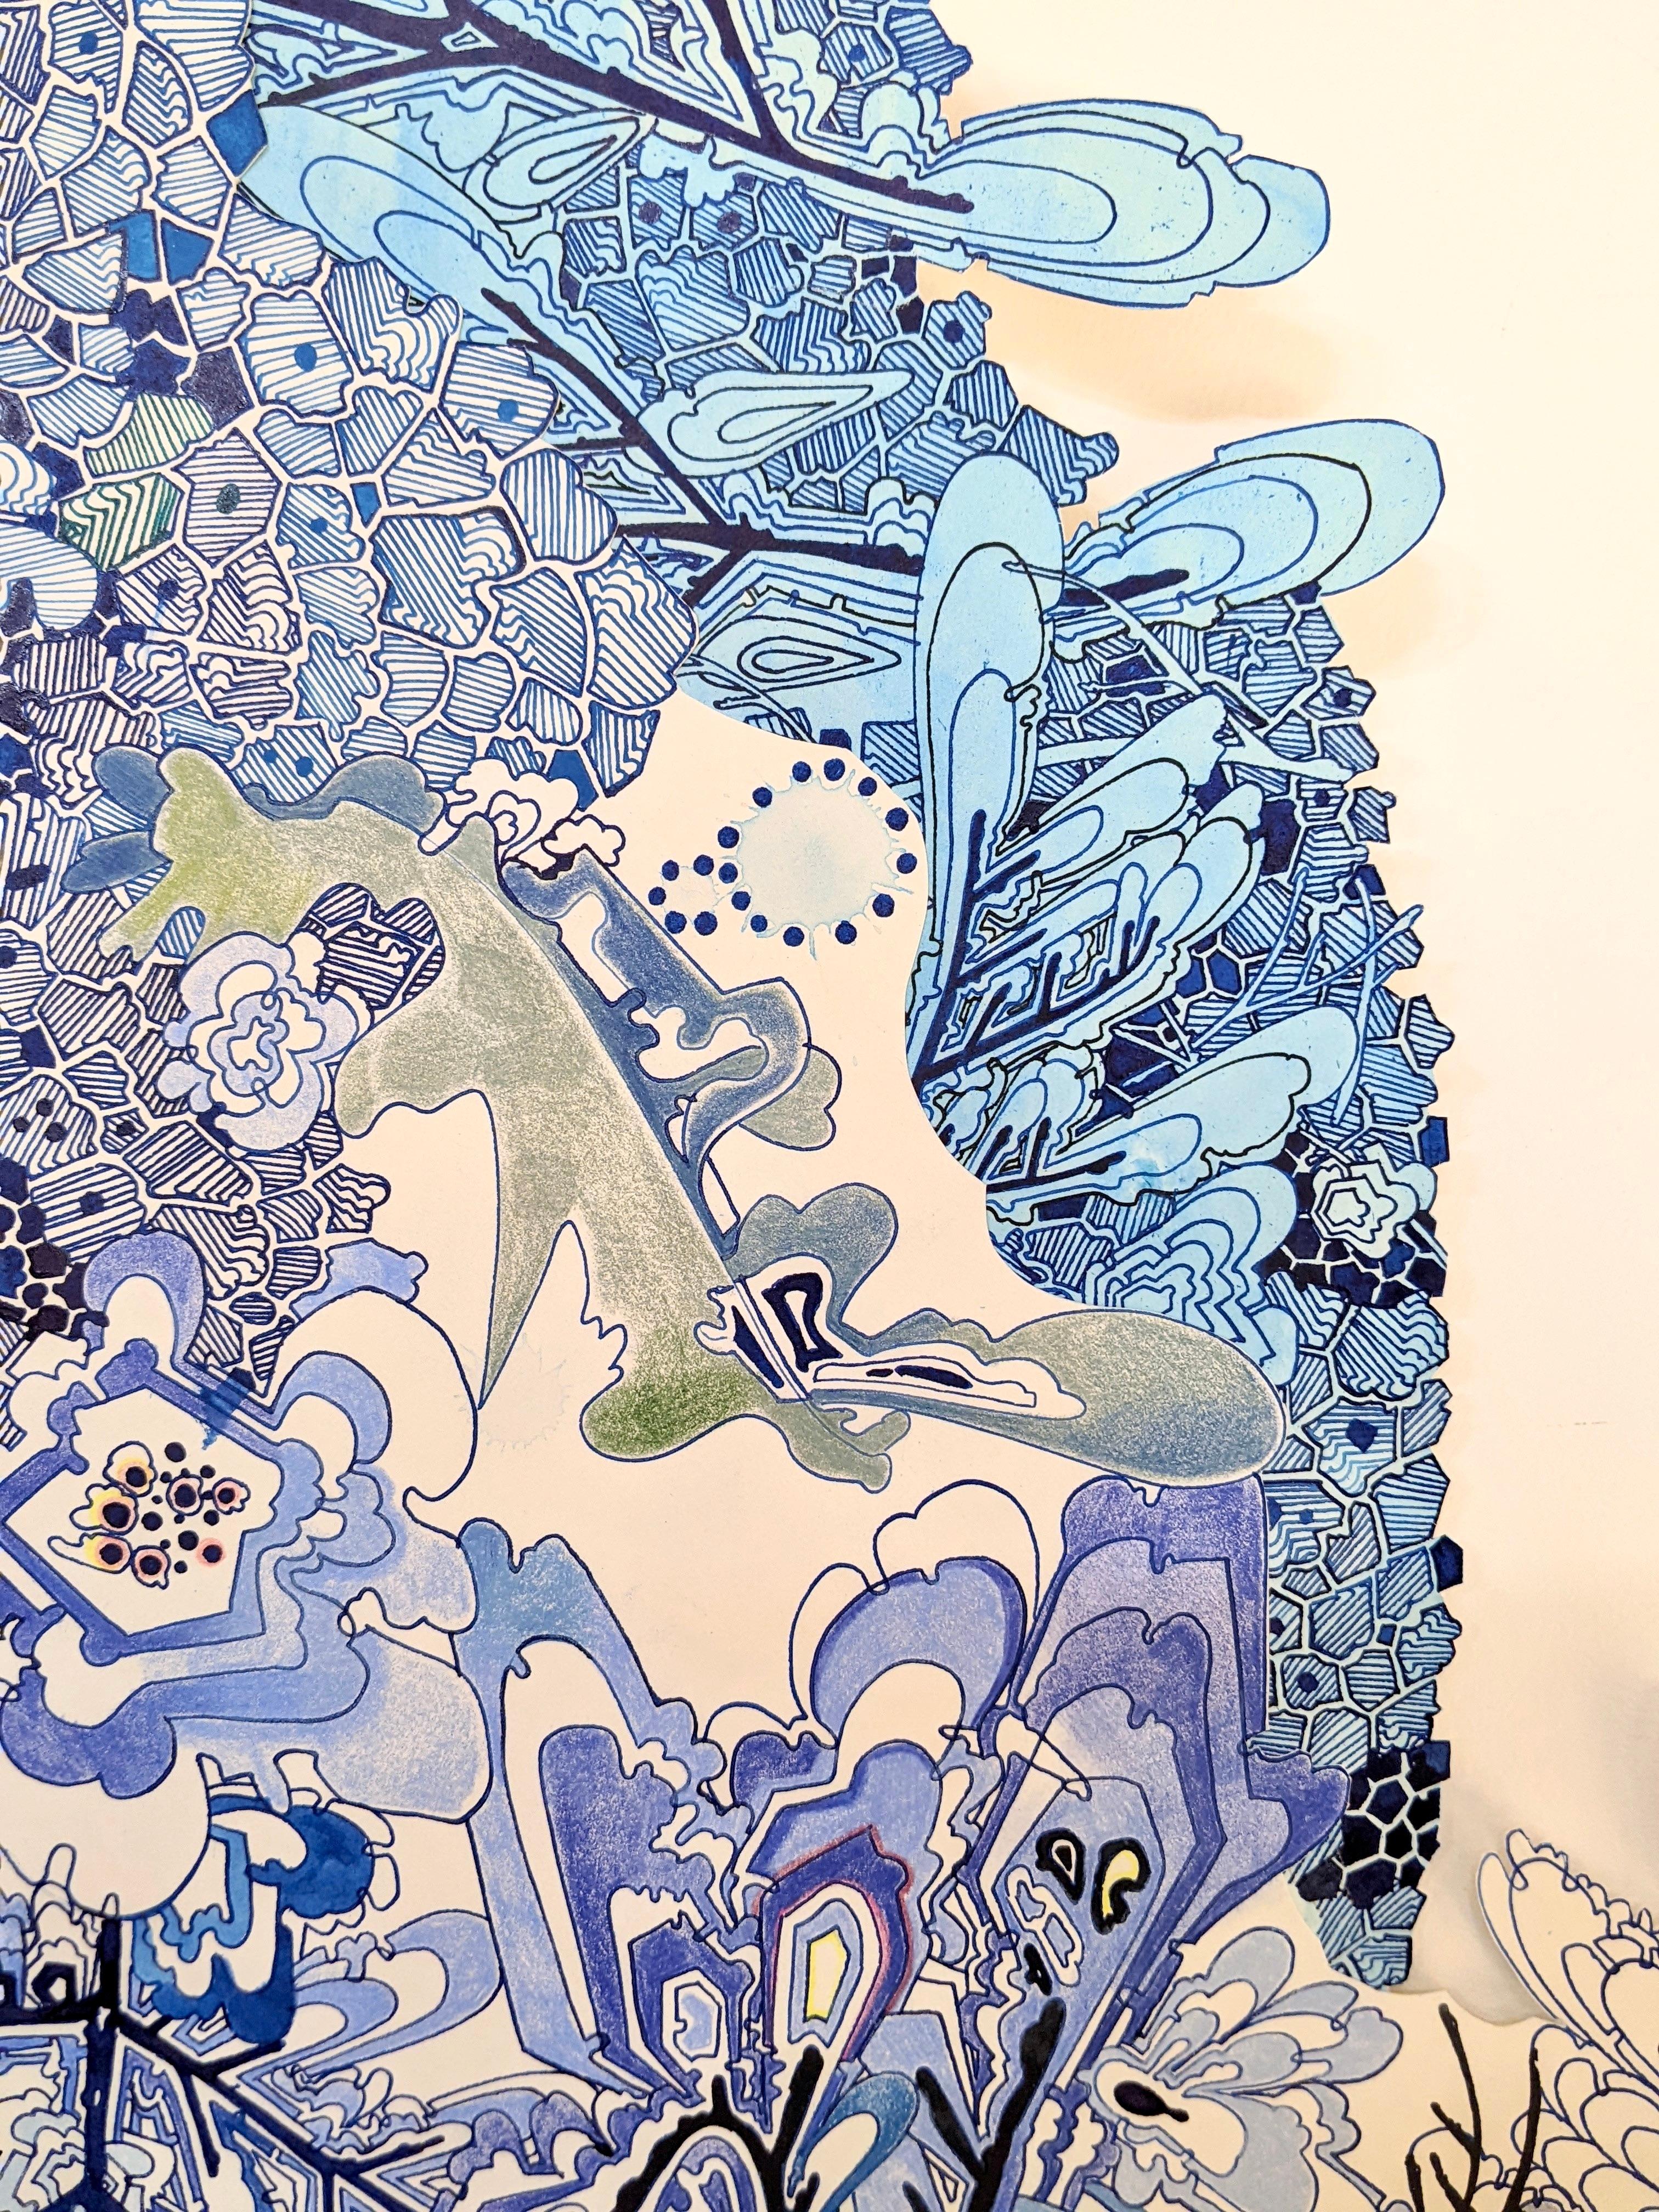 In carefully drawn dots and lines in shades of indigo blue with yellow, red and pink details, botanical forms, snowflakes and strawberries, this intricate composition is inspired by patterns in nature. This cutout drawing, ink, colored pencil and